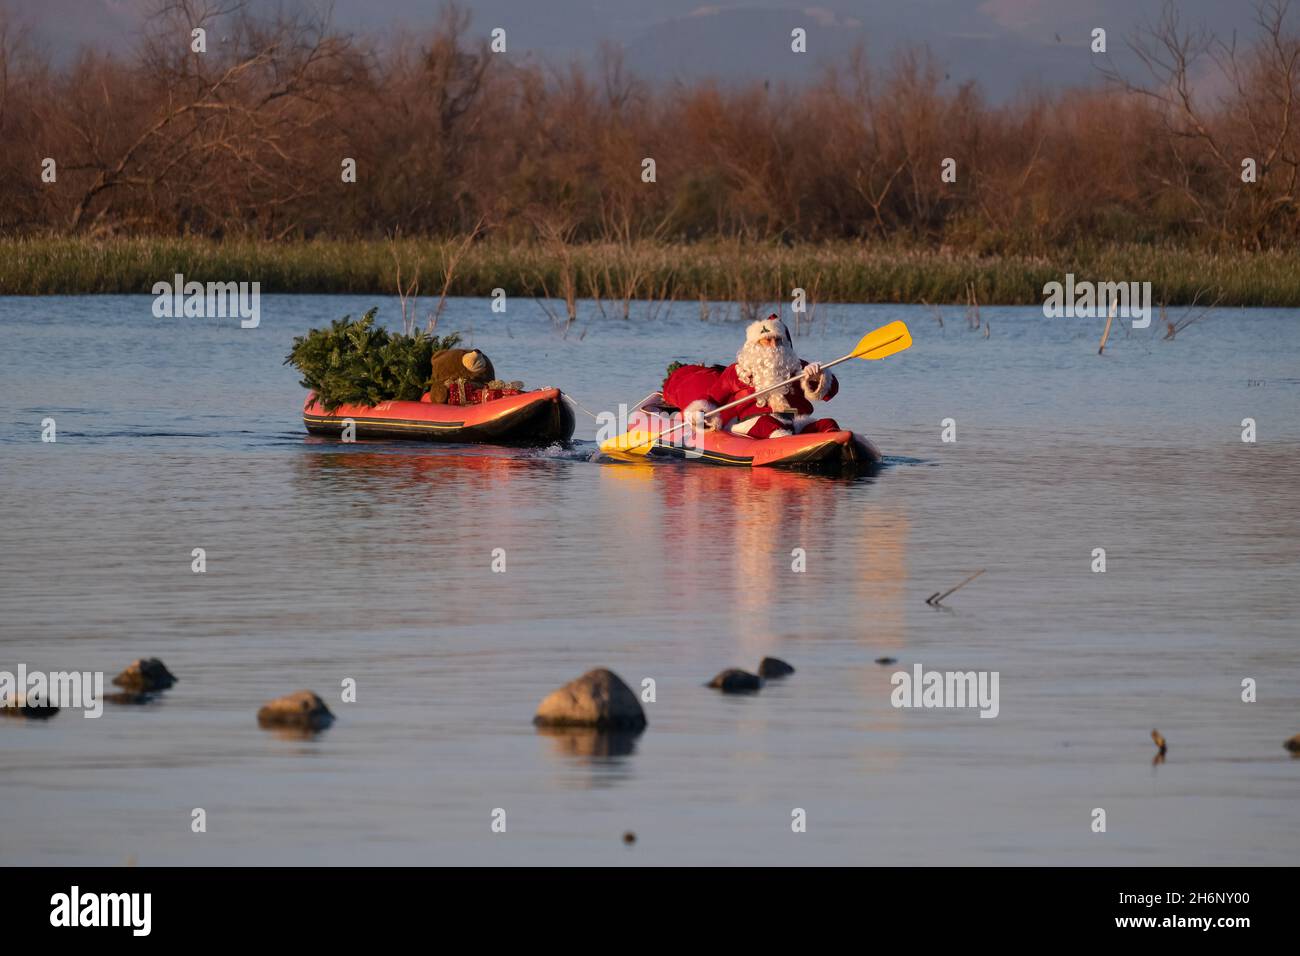 Issa Kassissieh, an Arab Orthodox Christian and Israel’s only certified Santa Claus, paddles with a Christmas tree and presents during the filming of a Christmas season advertisement for the Israeli ministry of tourism at the eastern side of the Sea of Galilee in Israel. Stock Photo